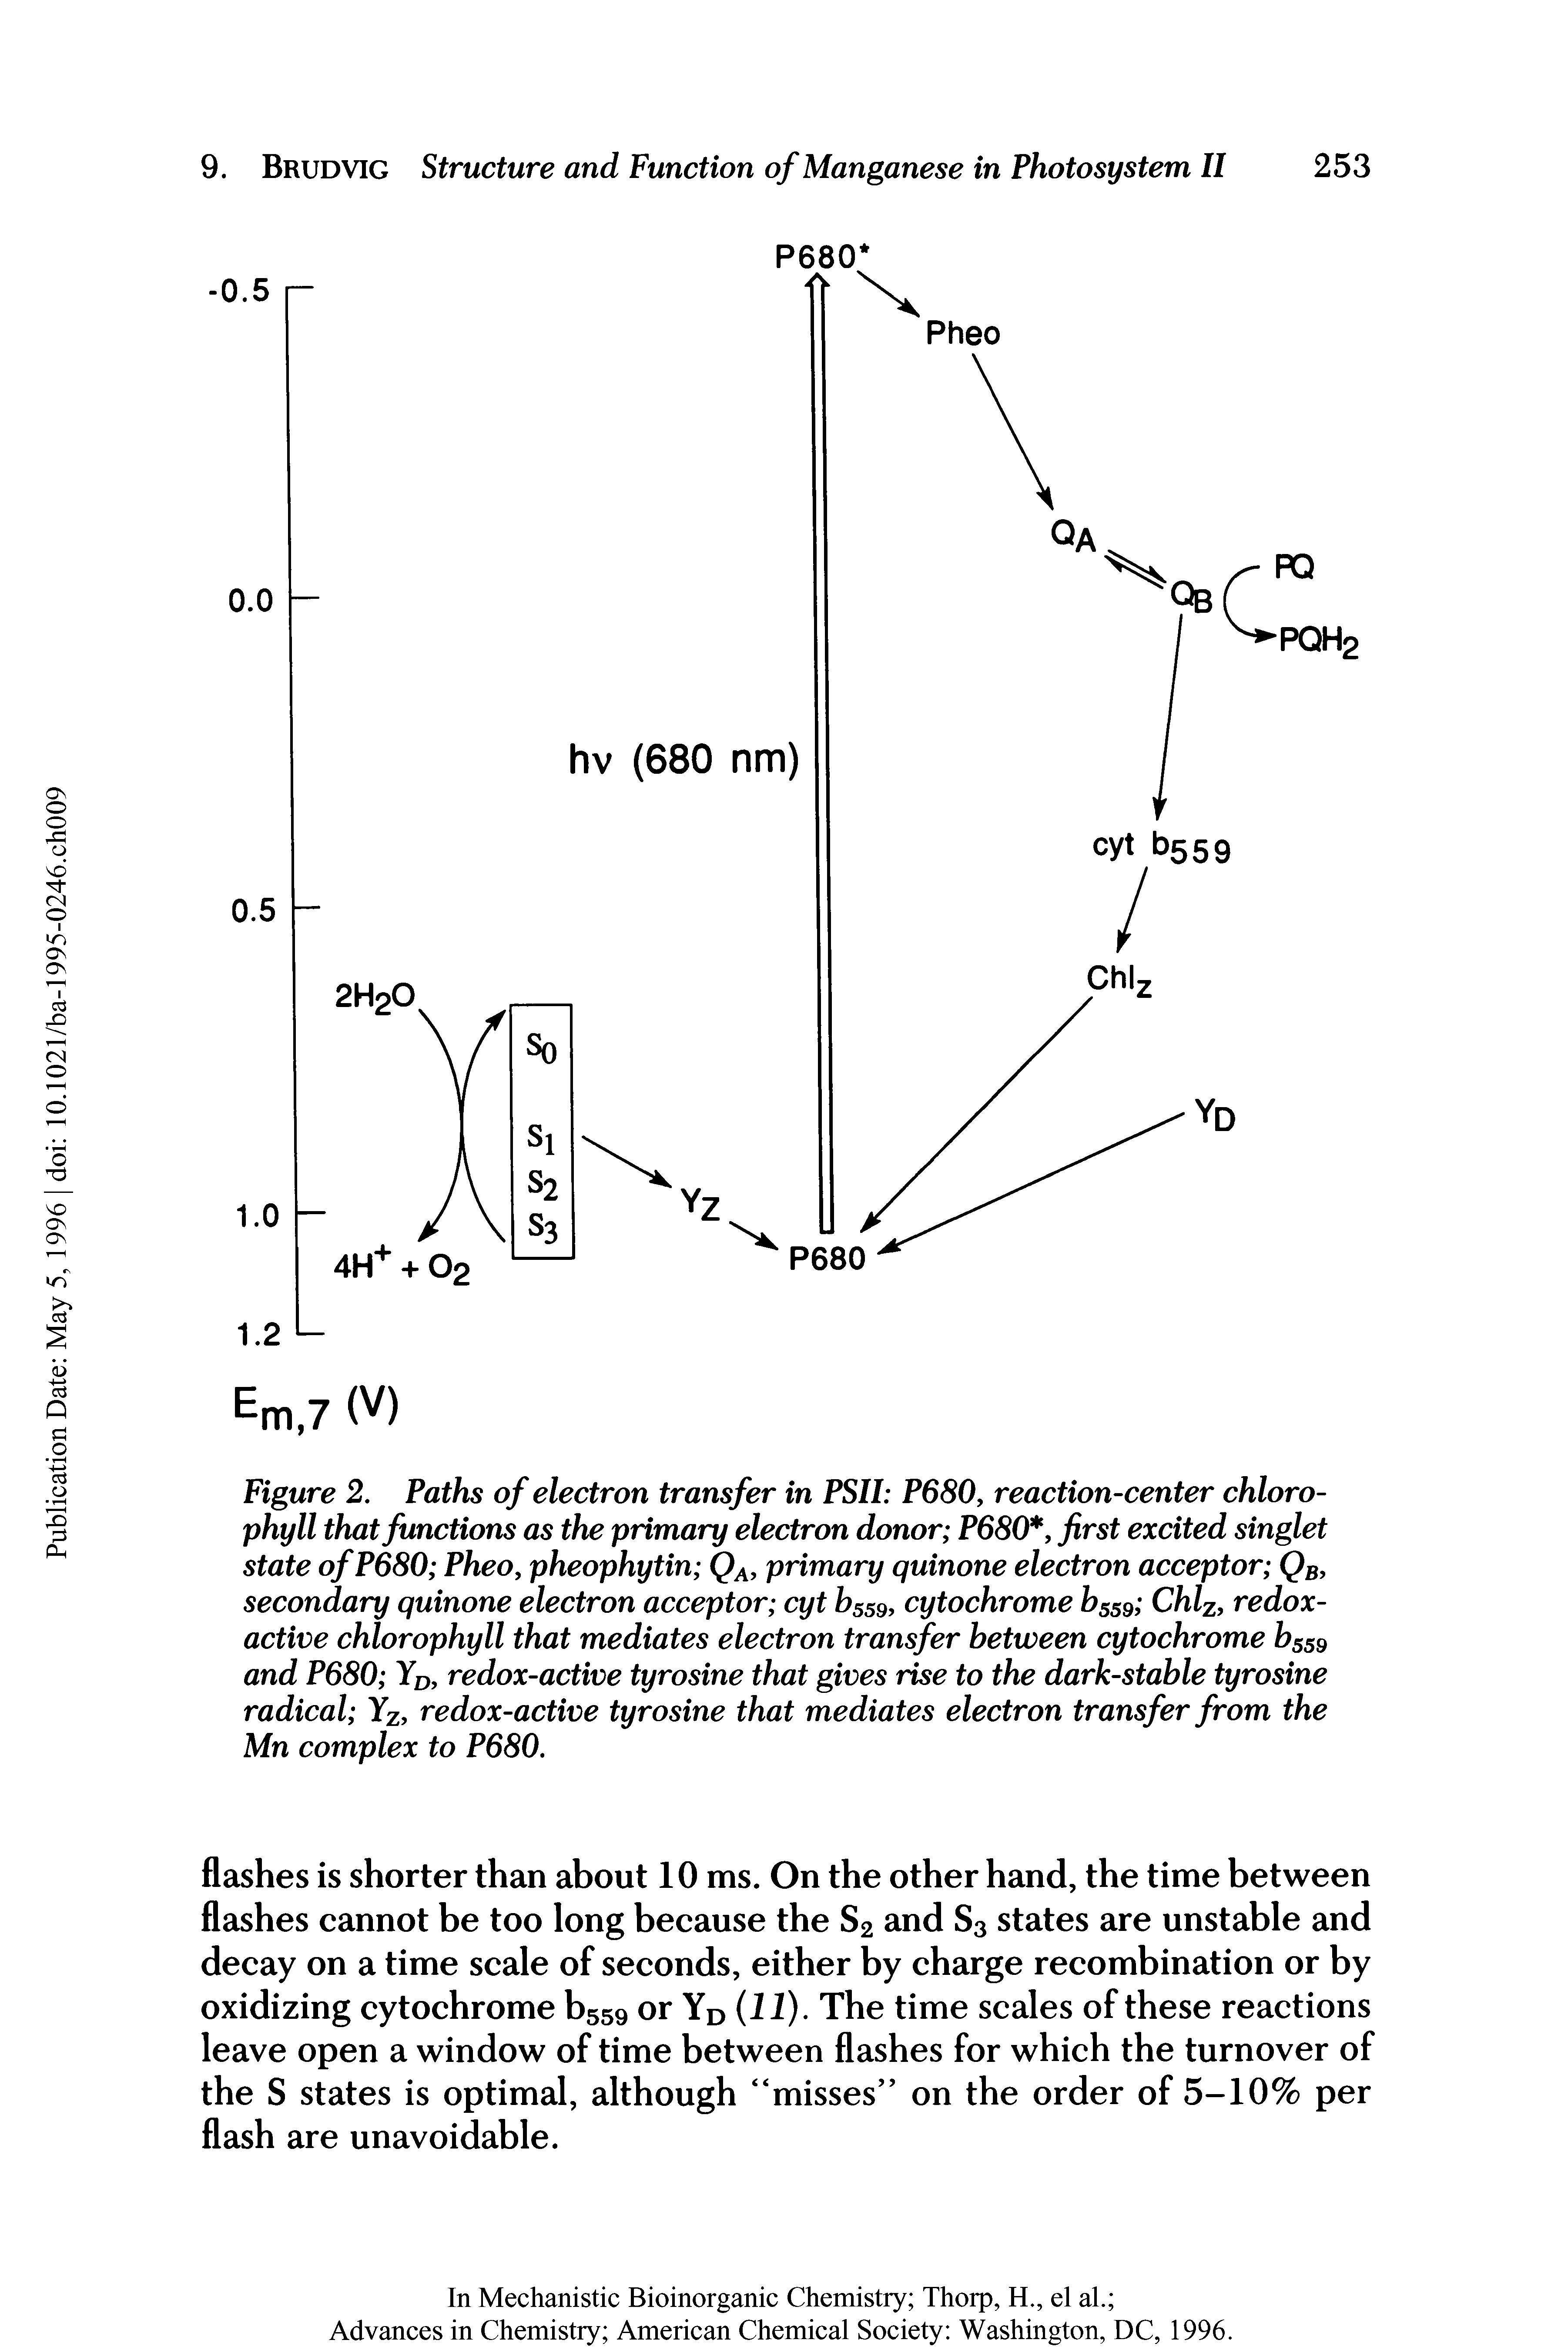 Figure 2. Paths of electron transfer in PSII P680, reaction-center chlorophyll that functions as the primary electron donor P680, first excited singlet state ofP680 Pheo, pheophytin QA, primary quinone electron acceptor QB, secondary quinone electron acceptor cyt b559, cytochrome b559 Chlz, redox-active chlorophyll that mediates electron transfer between cytochrome b559 and P680 YD, redox-active tyrosine that gives rise to the dark-stable tyrosine radical Yz, redox-active tyrosine that mediates electron transfer from the Mn complex to P680.